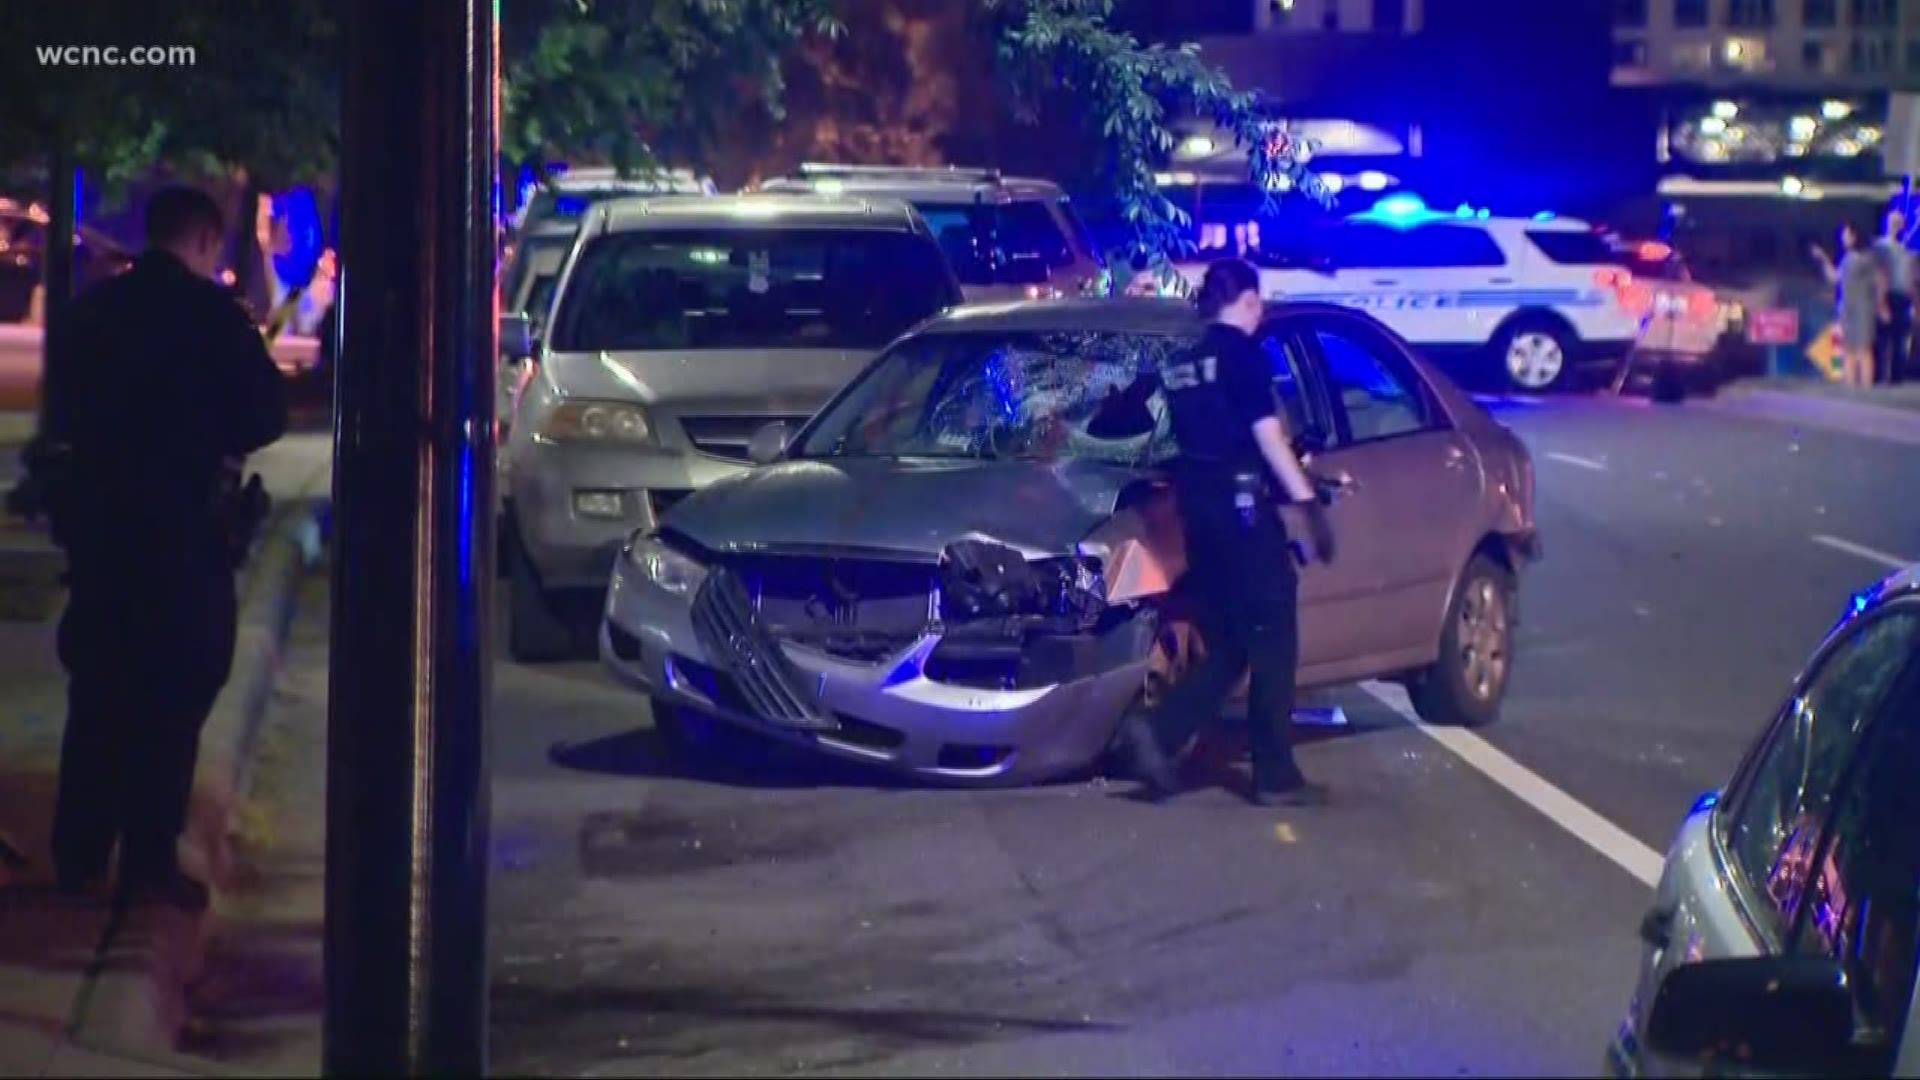 Charlotte Mecklenburg Police say the driver ran from the scene, leaving his car. According to Medic, the man was struck at South Boulevard and East Carson Boulevard Tuesday night.